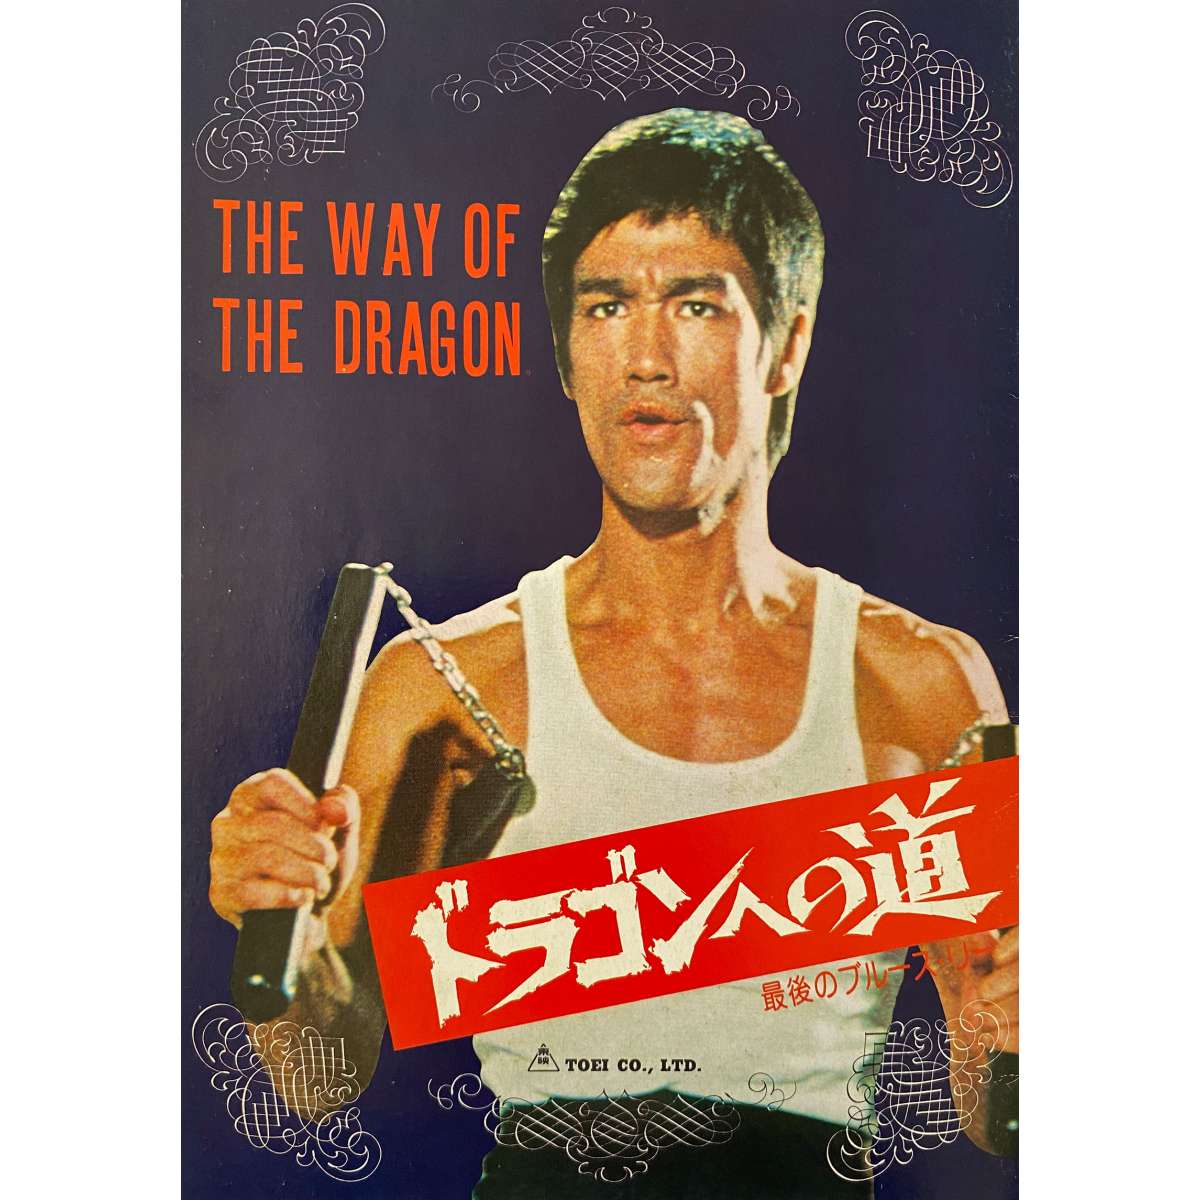 The Way Of The Dragon Japanese Program 9x12 In 1974 26p